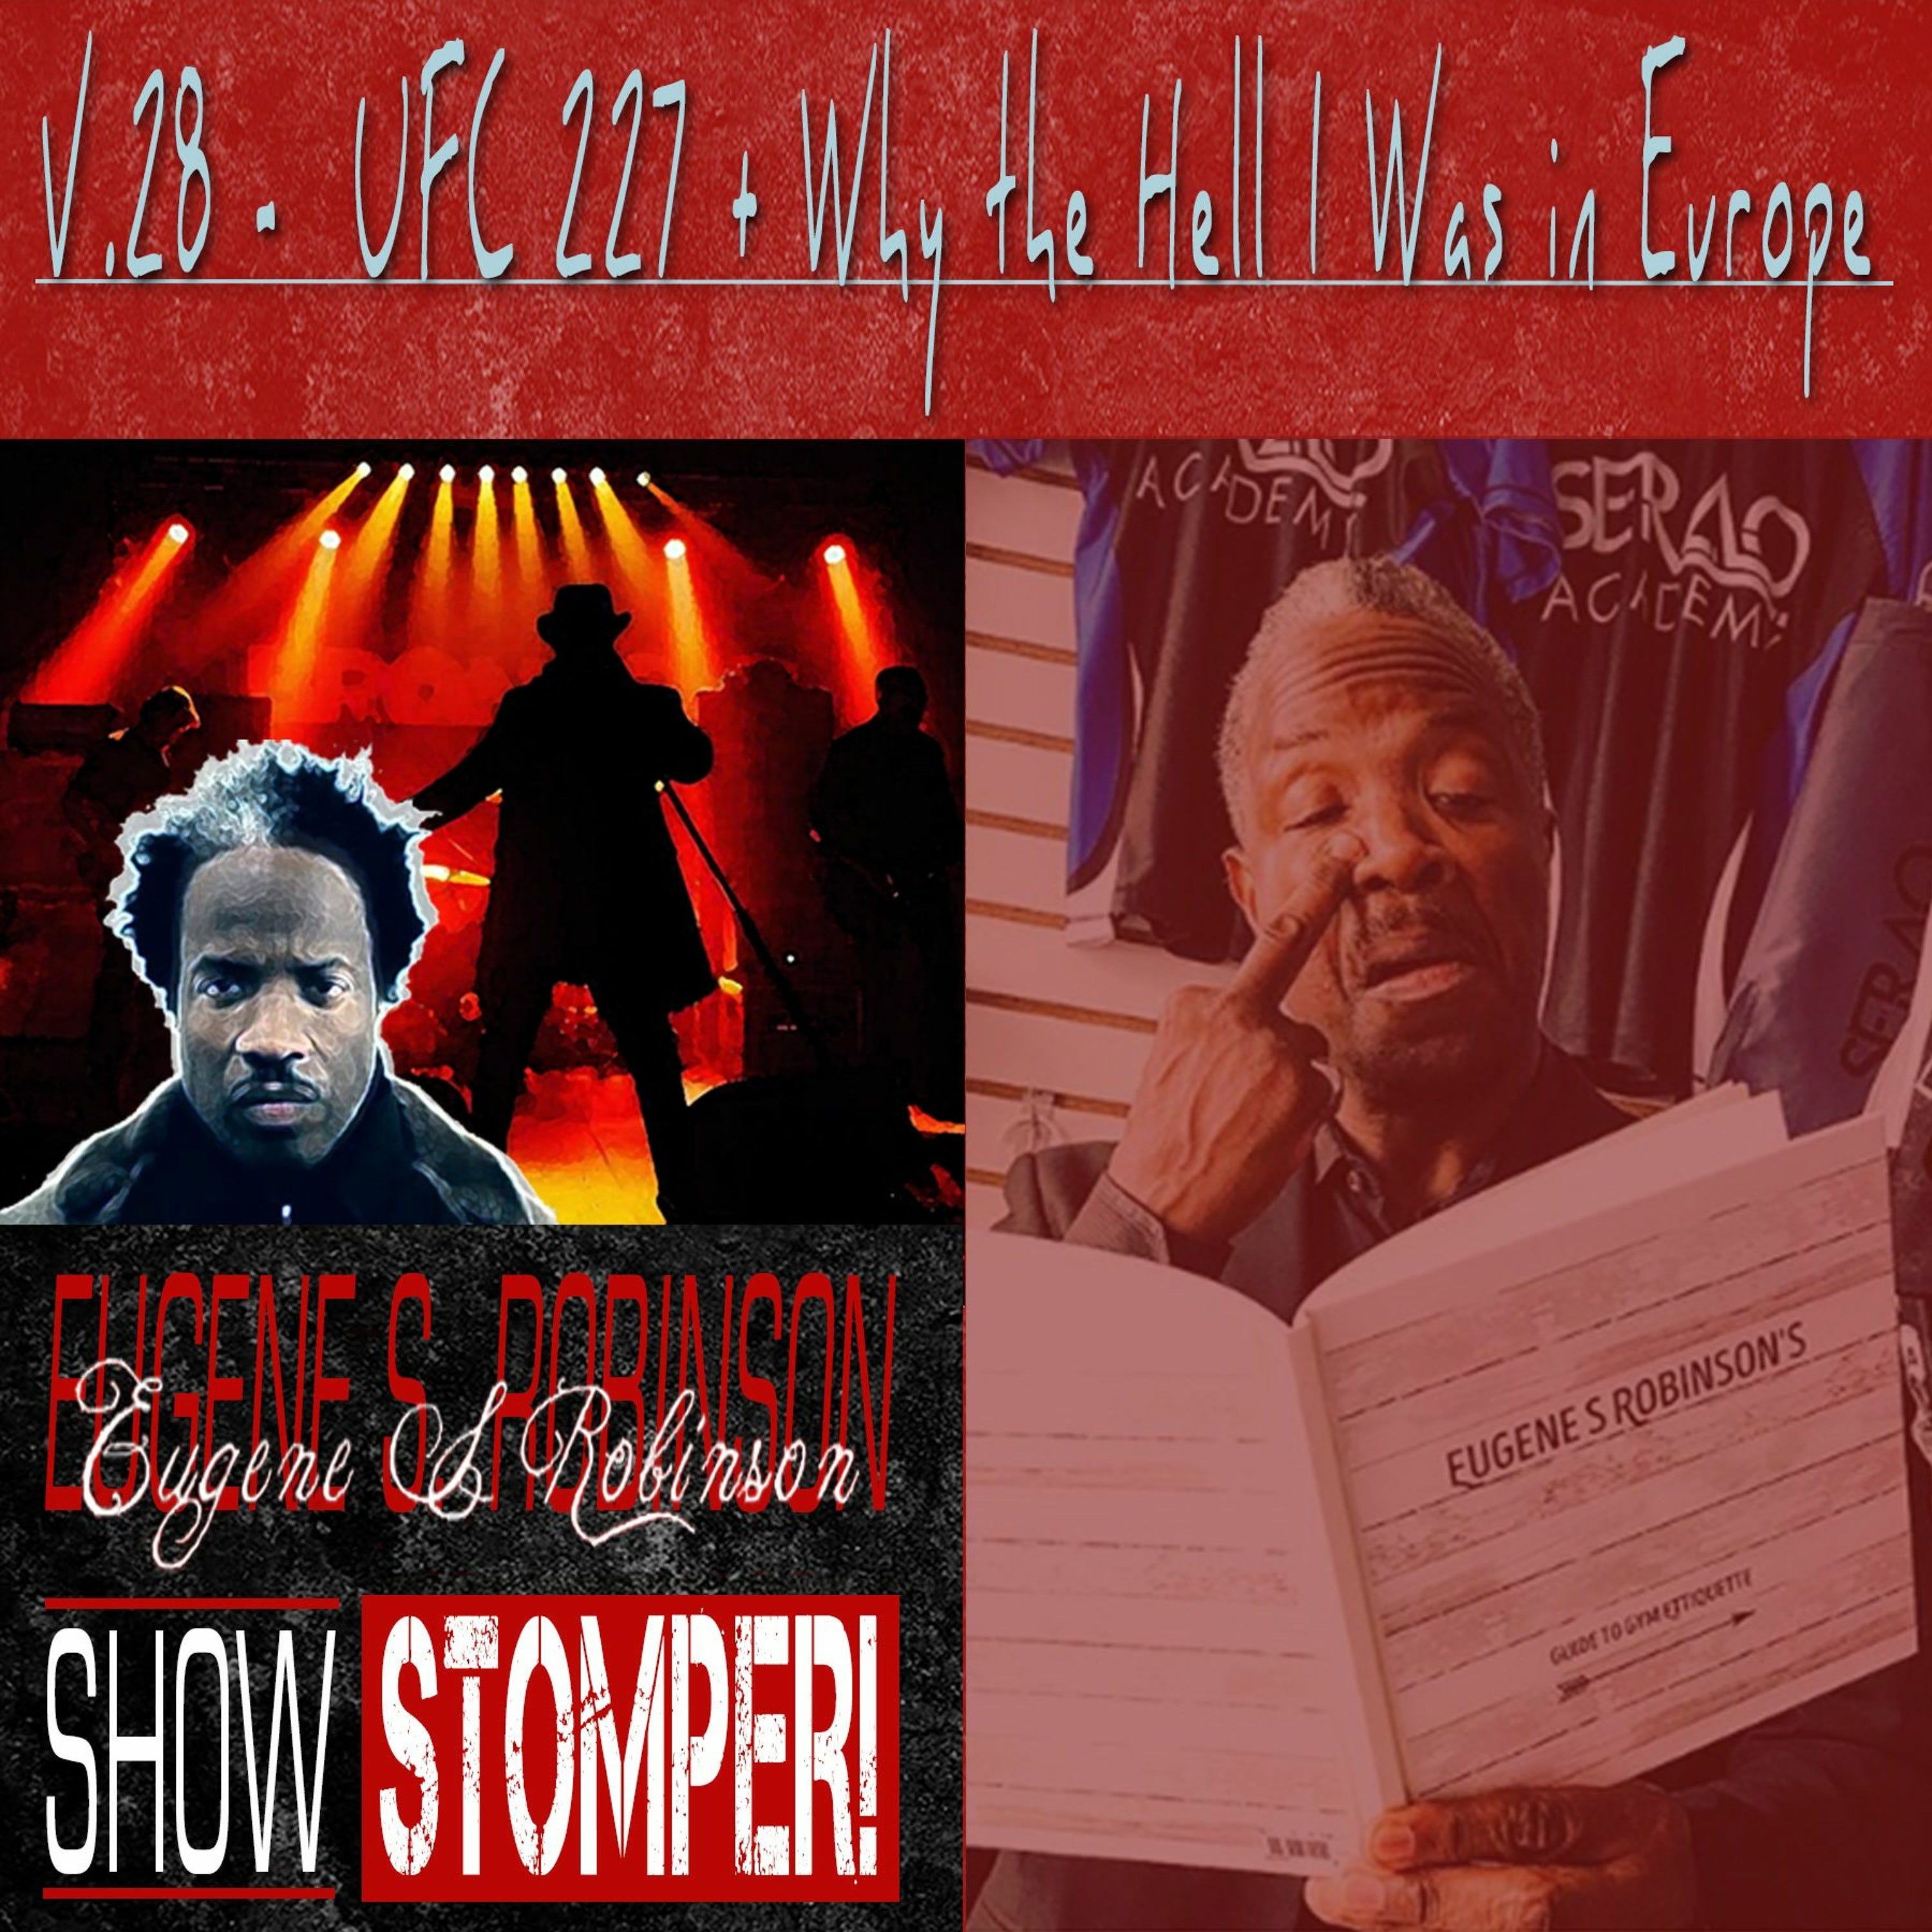 The Eugene S. Robinson Show Stomper! V.28 - UFC 227 + Why The Hell I Was In Europe